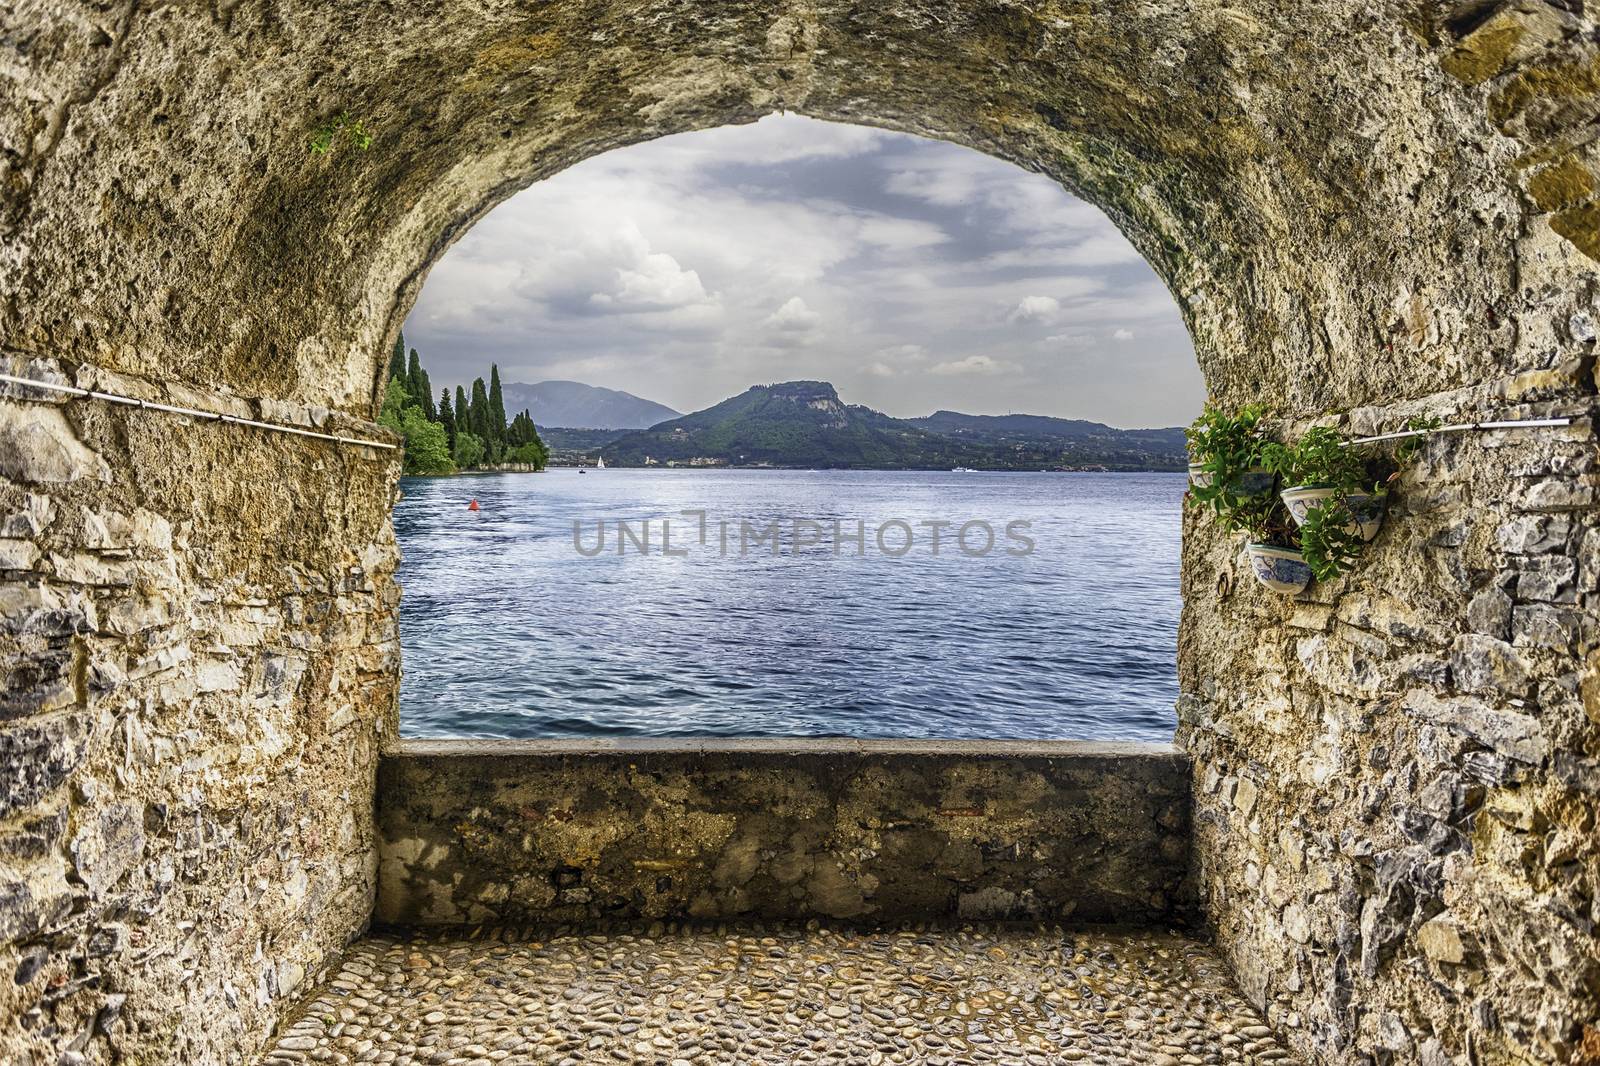 Scenic rock arch balcony overlooking Lake Garda from the town of Torbole, Italy